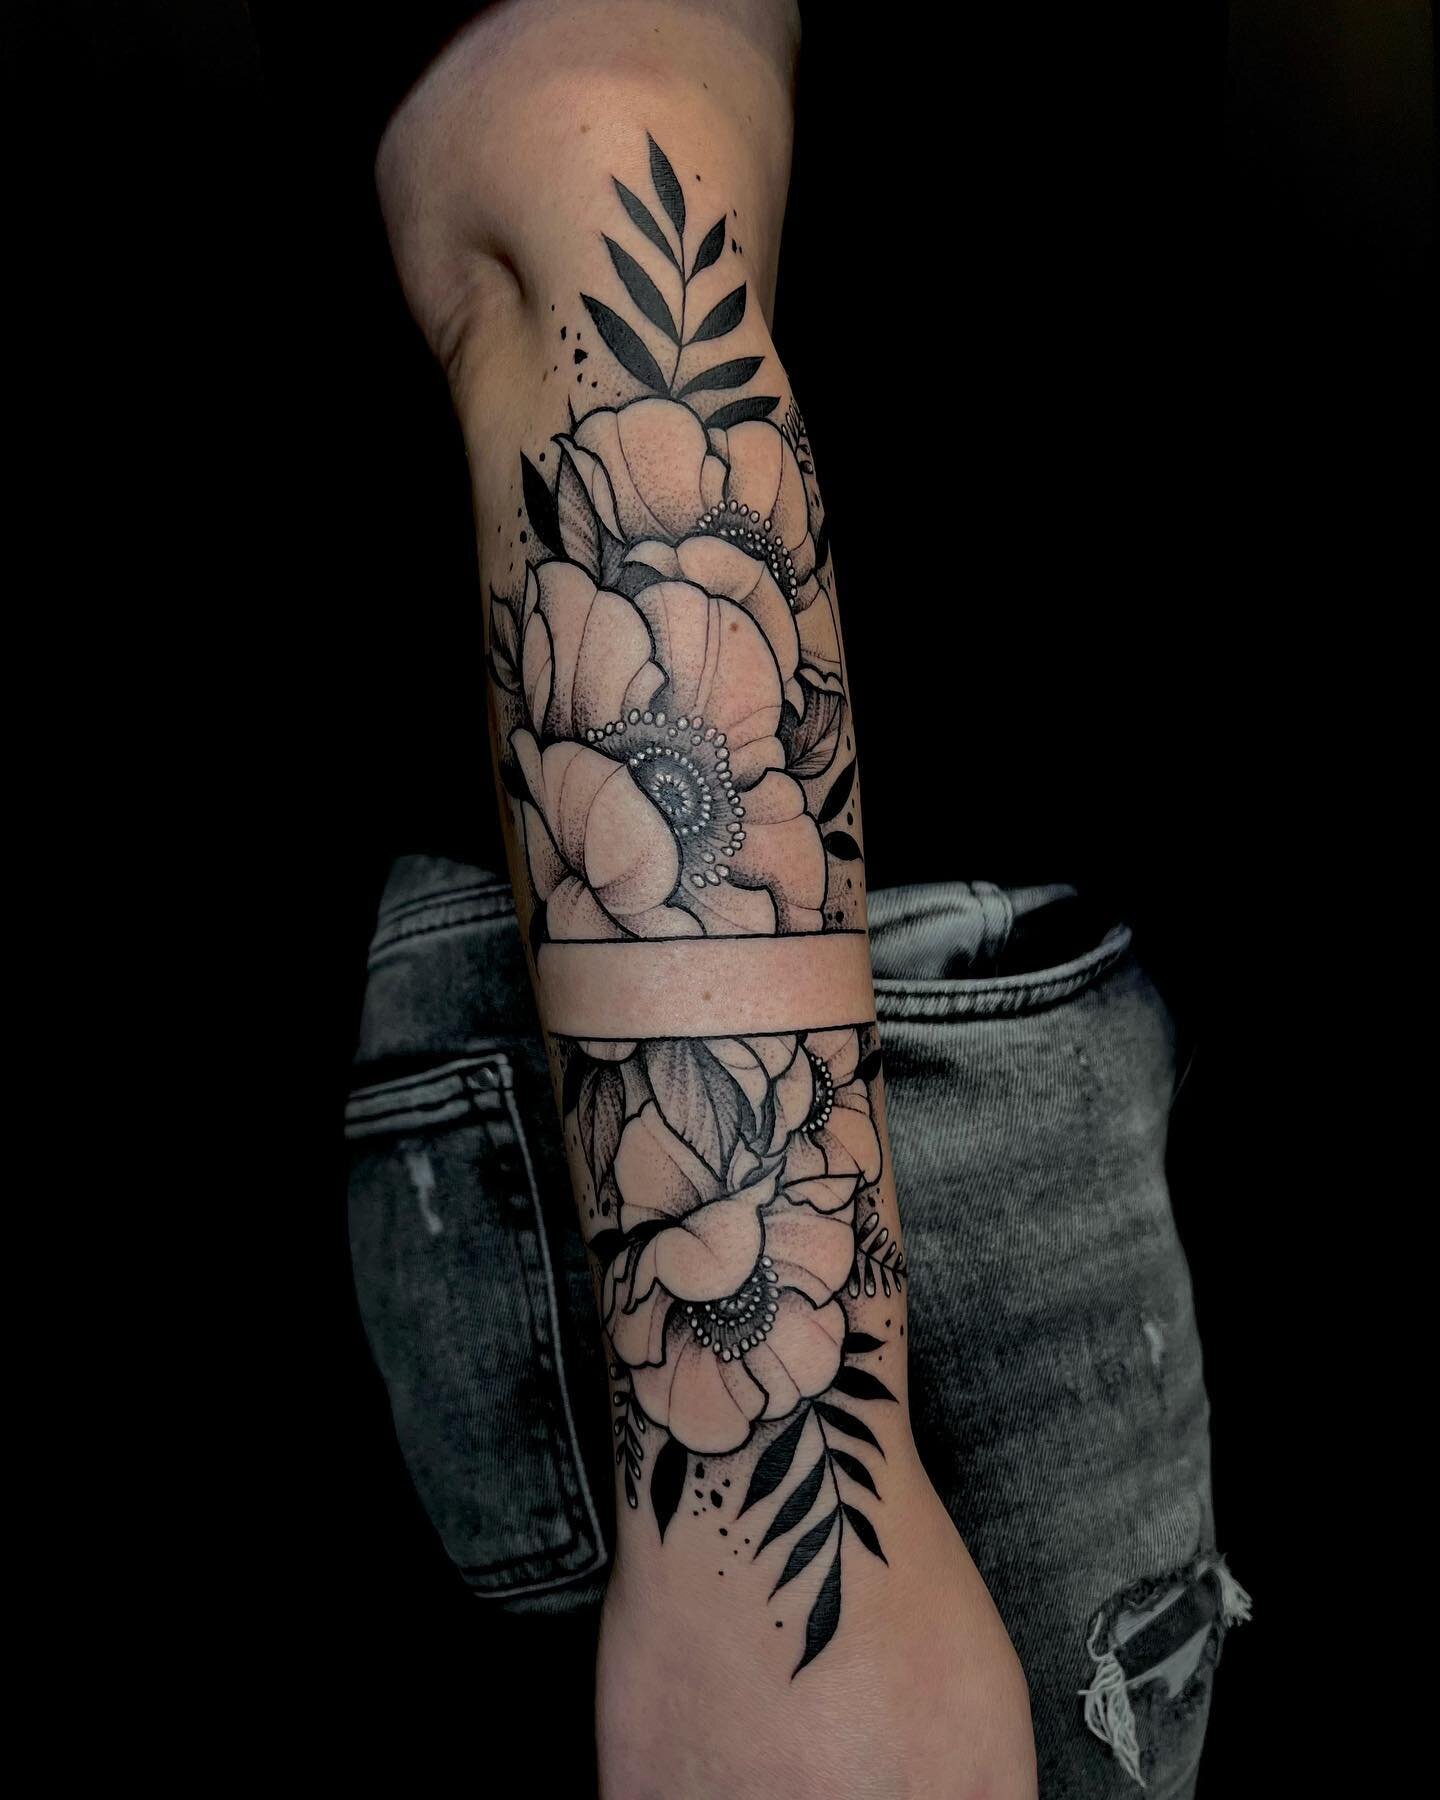 🔸 Flowers done by @denny_mur_tattoo 🔸

📣 Book your appointment!⁣⁣
📧 : rdv@atlastattoo.lu⁣⁣
☎️: 2 774 7074
📨 : DM Instagram / Facebook⁣⁣
📍 : 54 Bd Grande-Duchesse Charlotte, Luxembourg 

#atlastattoolu #tattooluxembourg #luxembourgtattoo #luxemb